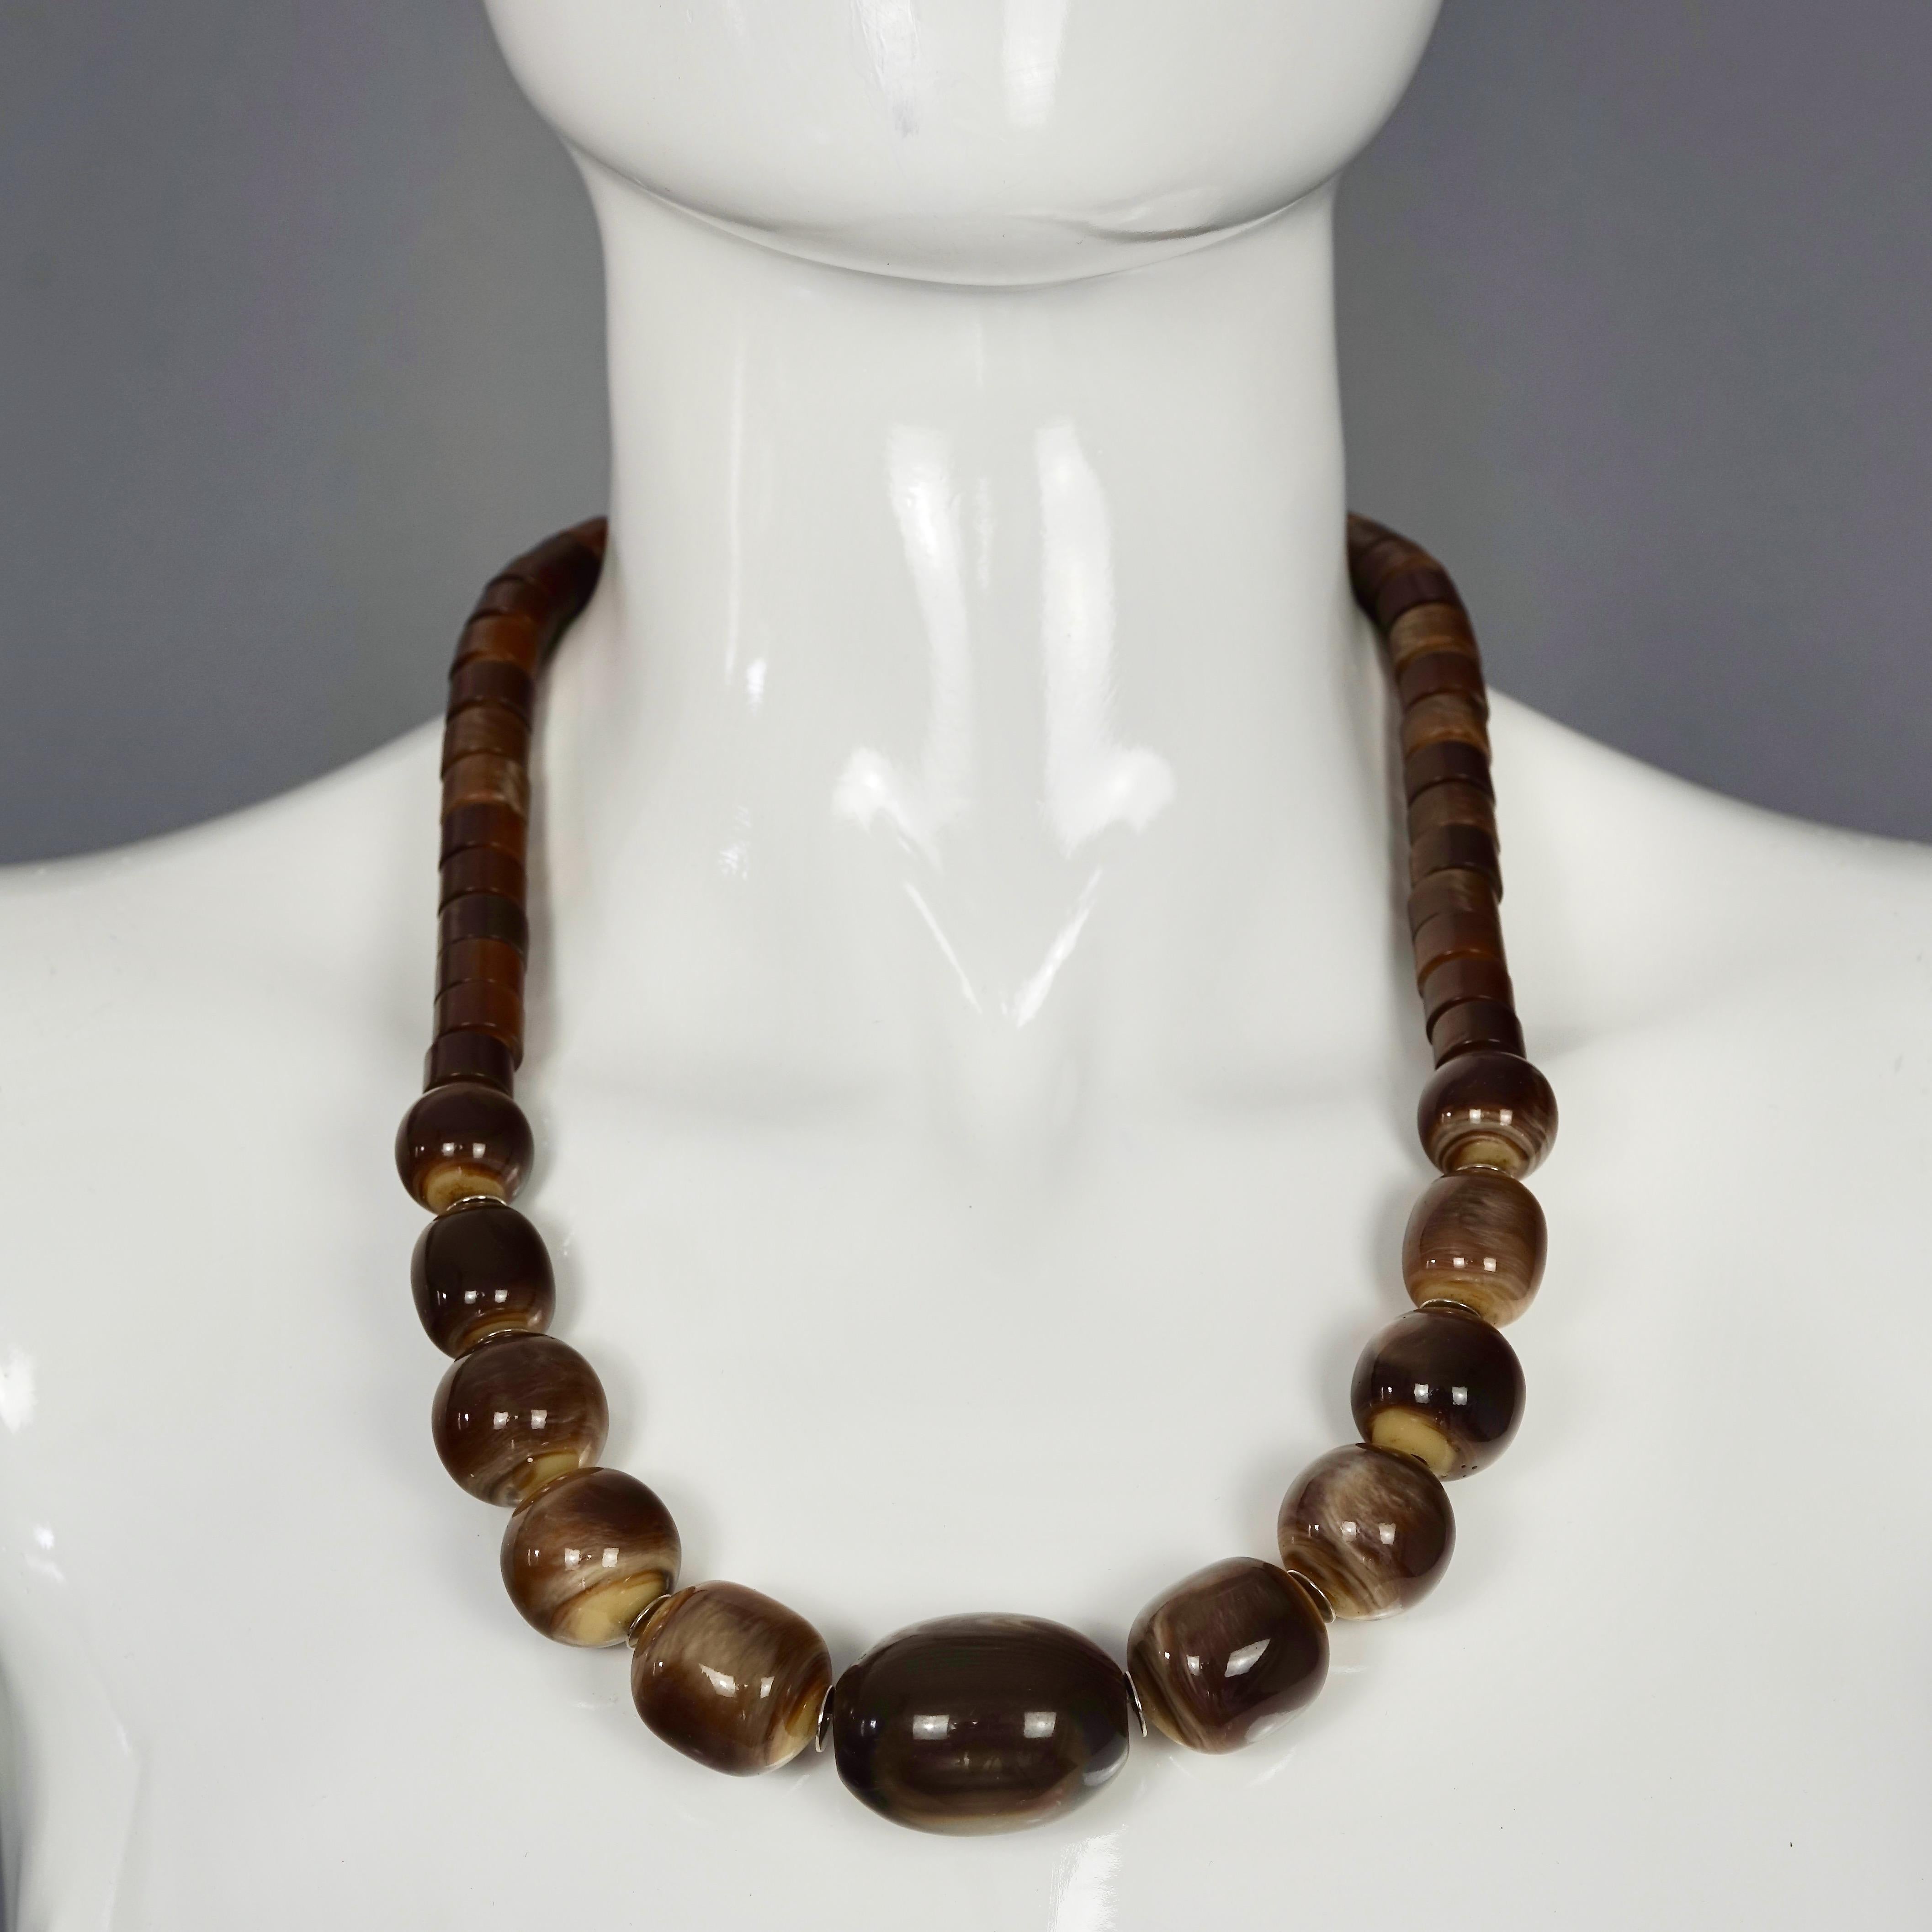 Vintage 1970s YVES SAINT LAURENT Ysl Tigers Eye Necklace by Roger Scemama

Measurements:
Height: 1.06 inches (2.7 cms)
Wearable Length: 23.22 inches (59 cm) until 24.40 inches (62 cm)

Features:
- 100% Authentic YVES SAINT LAURENT by Roger